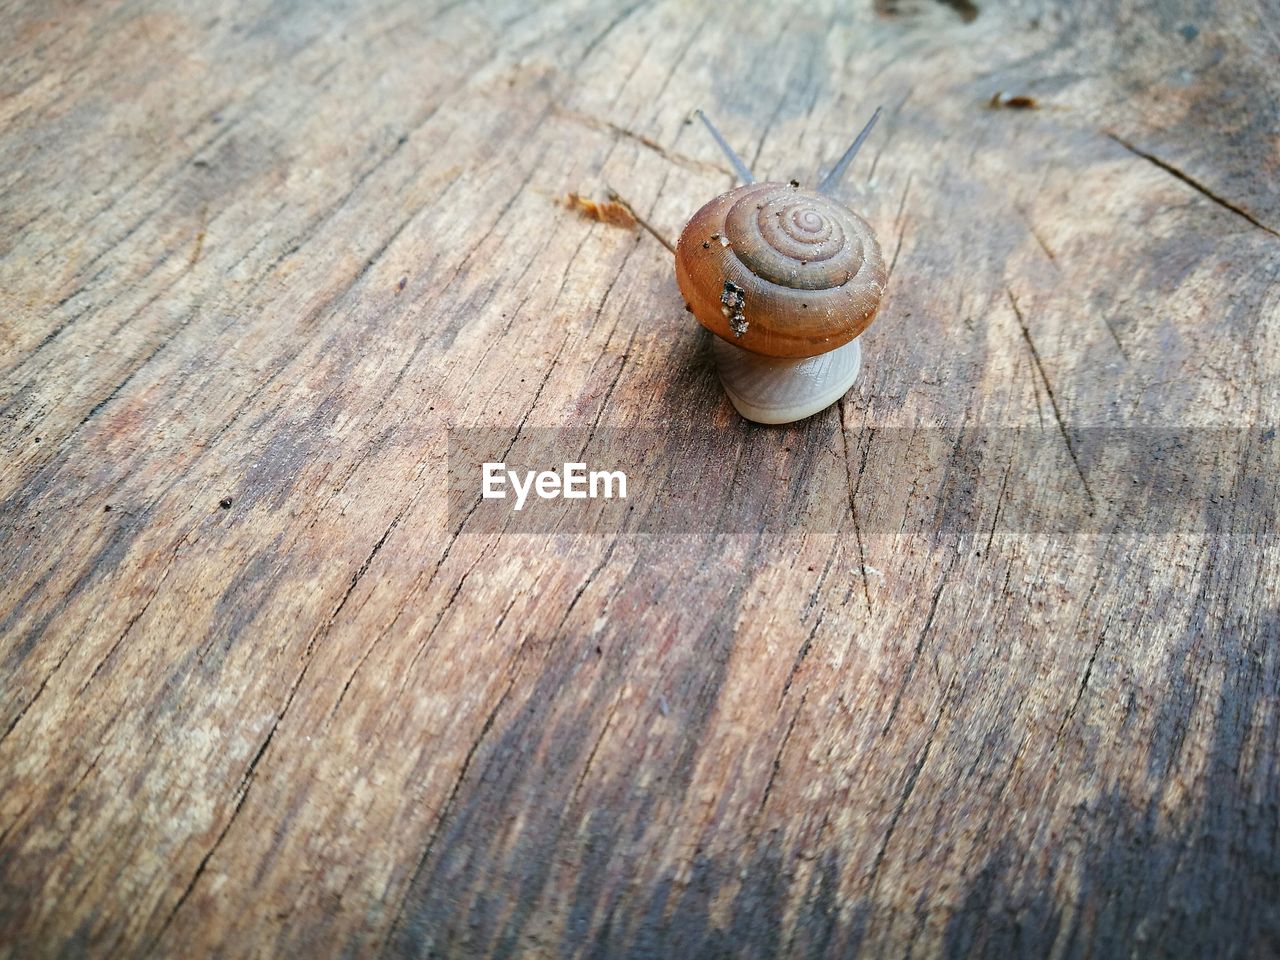 Close-up of snail on table